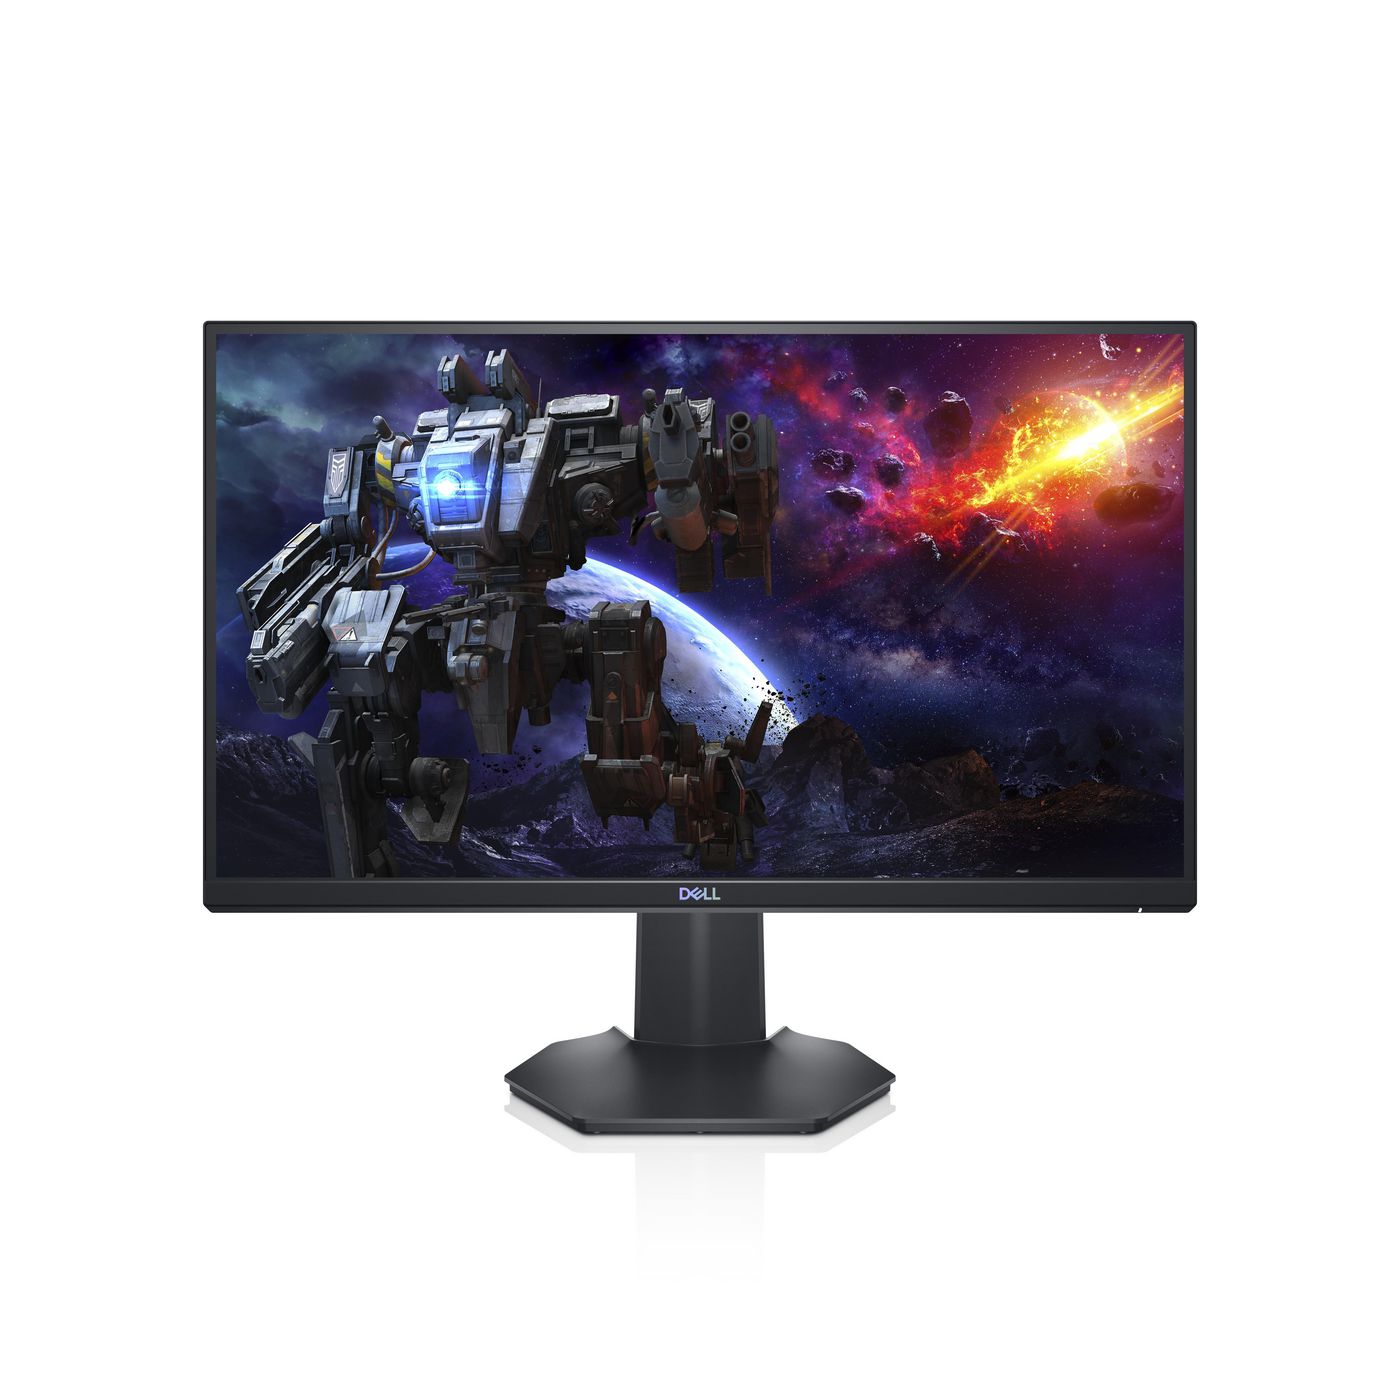 Gaming Monitor S2421hgf - 23.8in - 1920x1080 (fhd) - Black